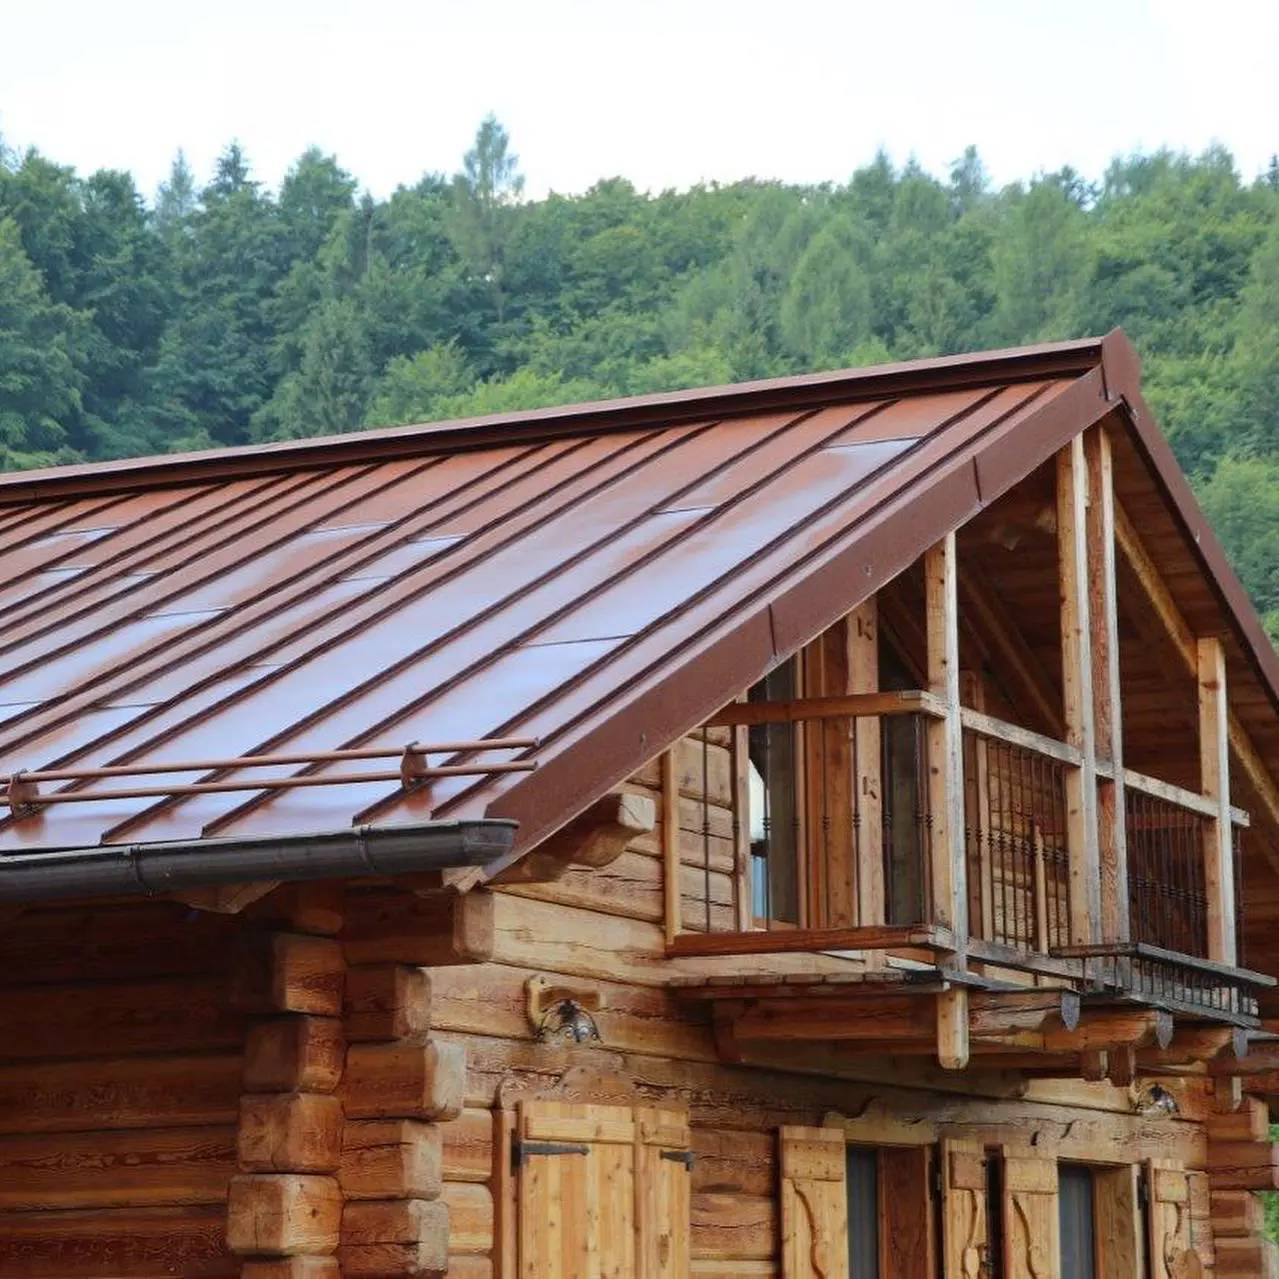 COR-TEN ® Weathered Steel Fully Supported Traditional Standing Seam Roofing and Facade Cladding - Standing Seam Roofing and Cladding